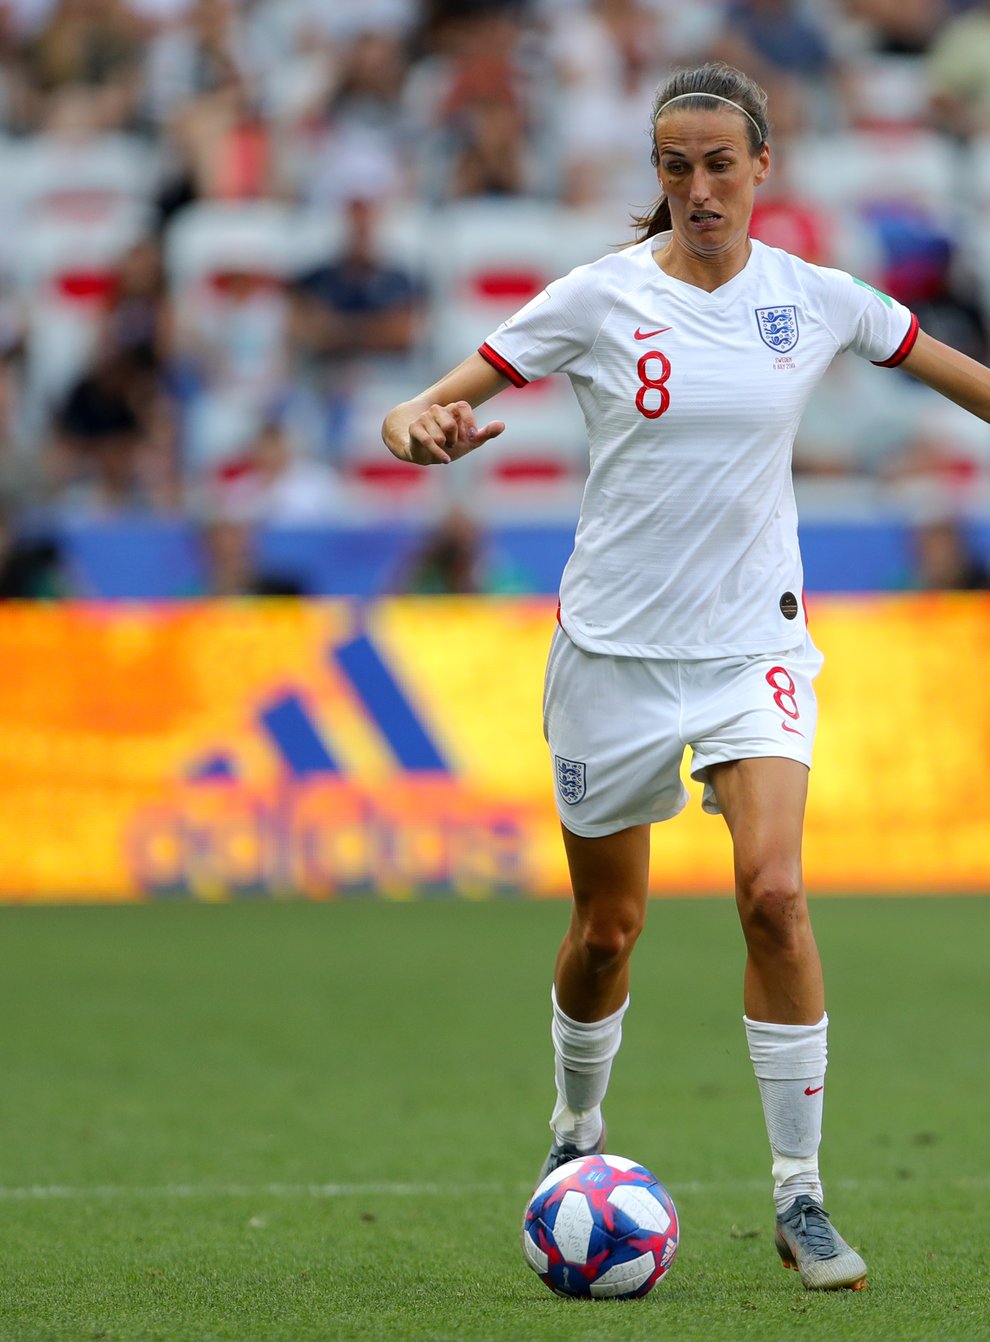 Jill Scott, who has earned 149 caps for England, believes the Euros being postponed a year could be a positive (PA Images)